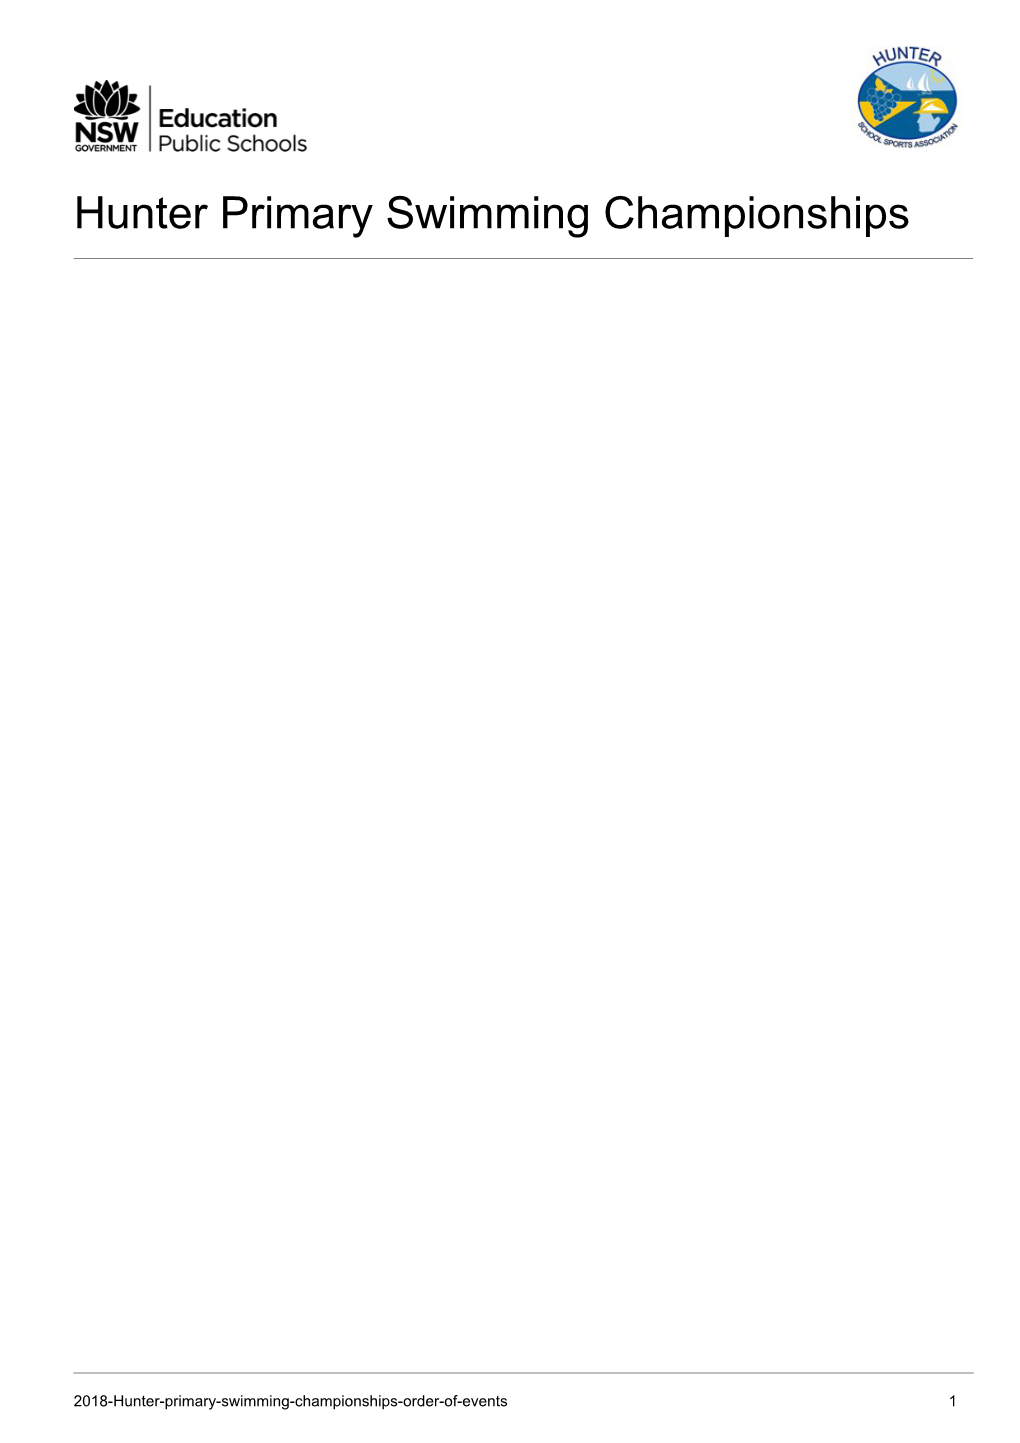 Hunter Primary Swimming Championships Order of Events